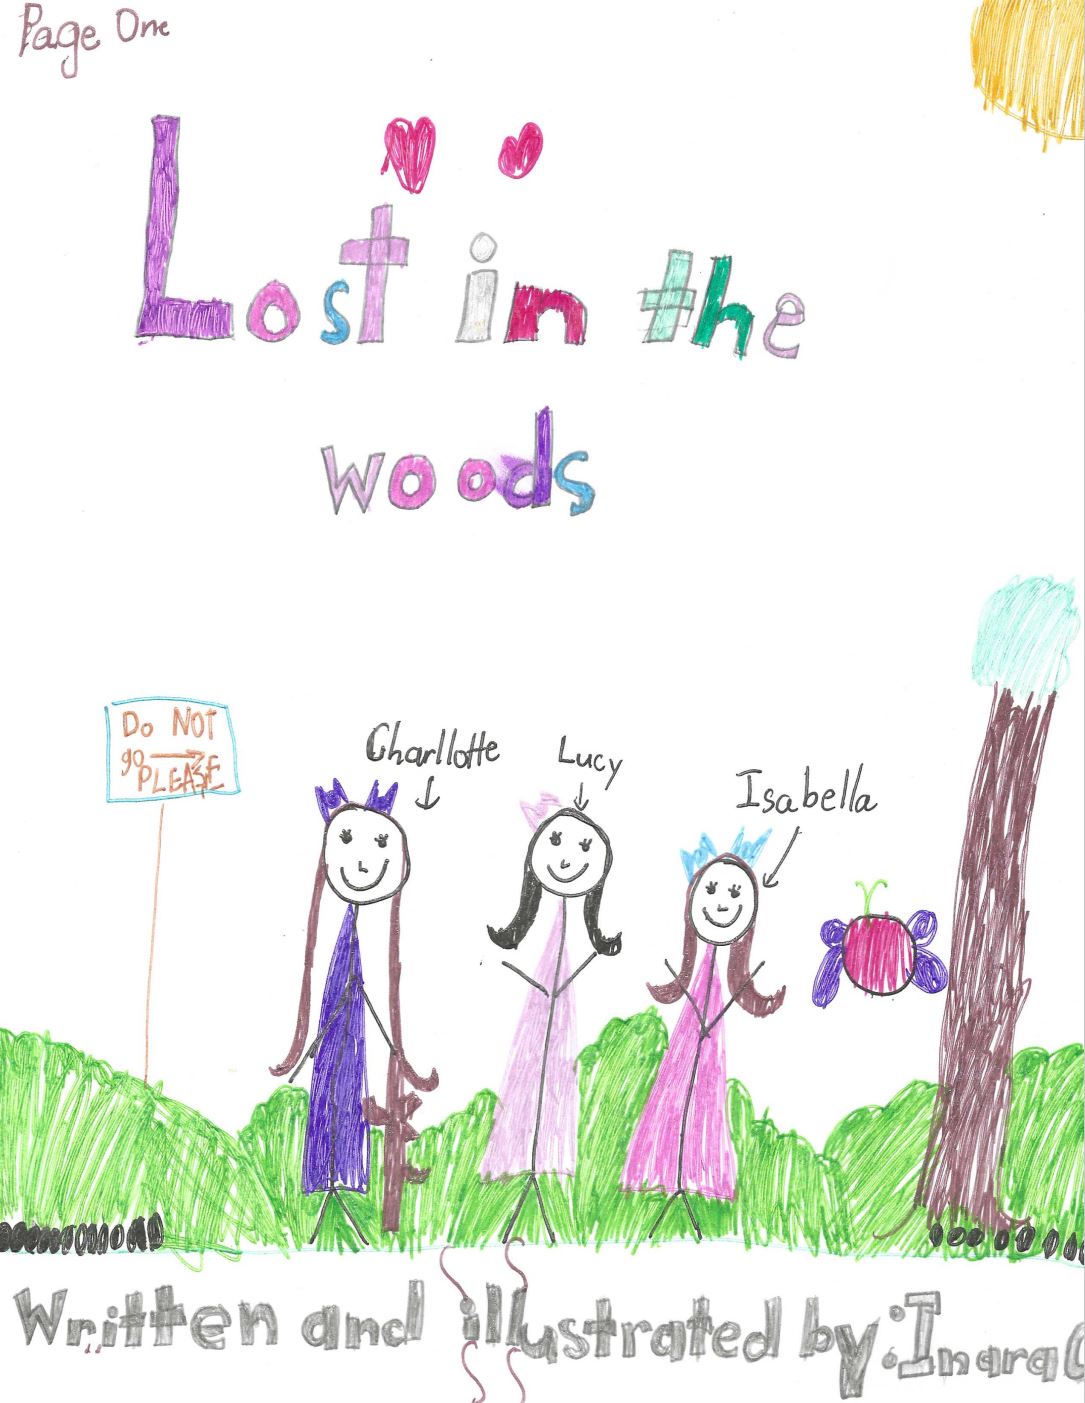 Lost in the woods by Inara C.